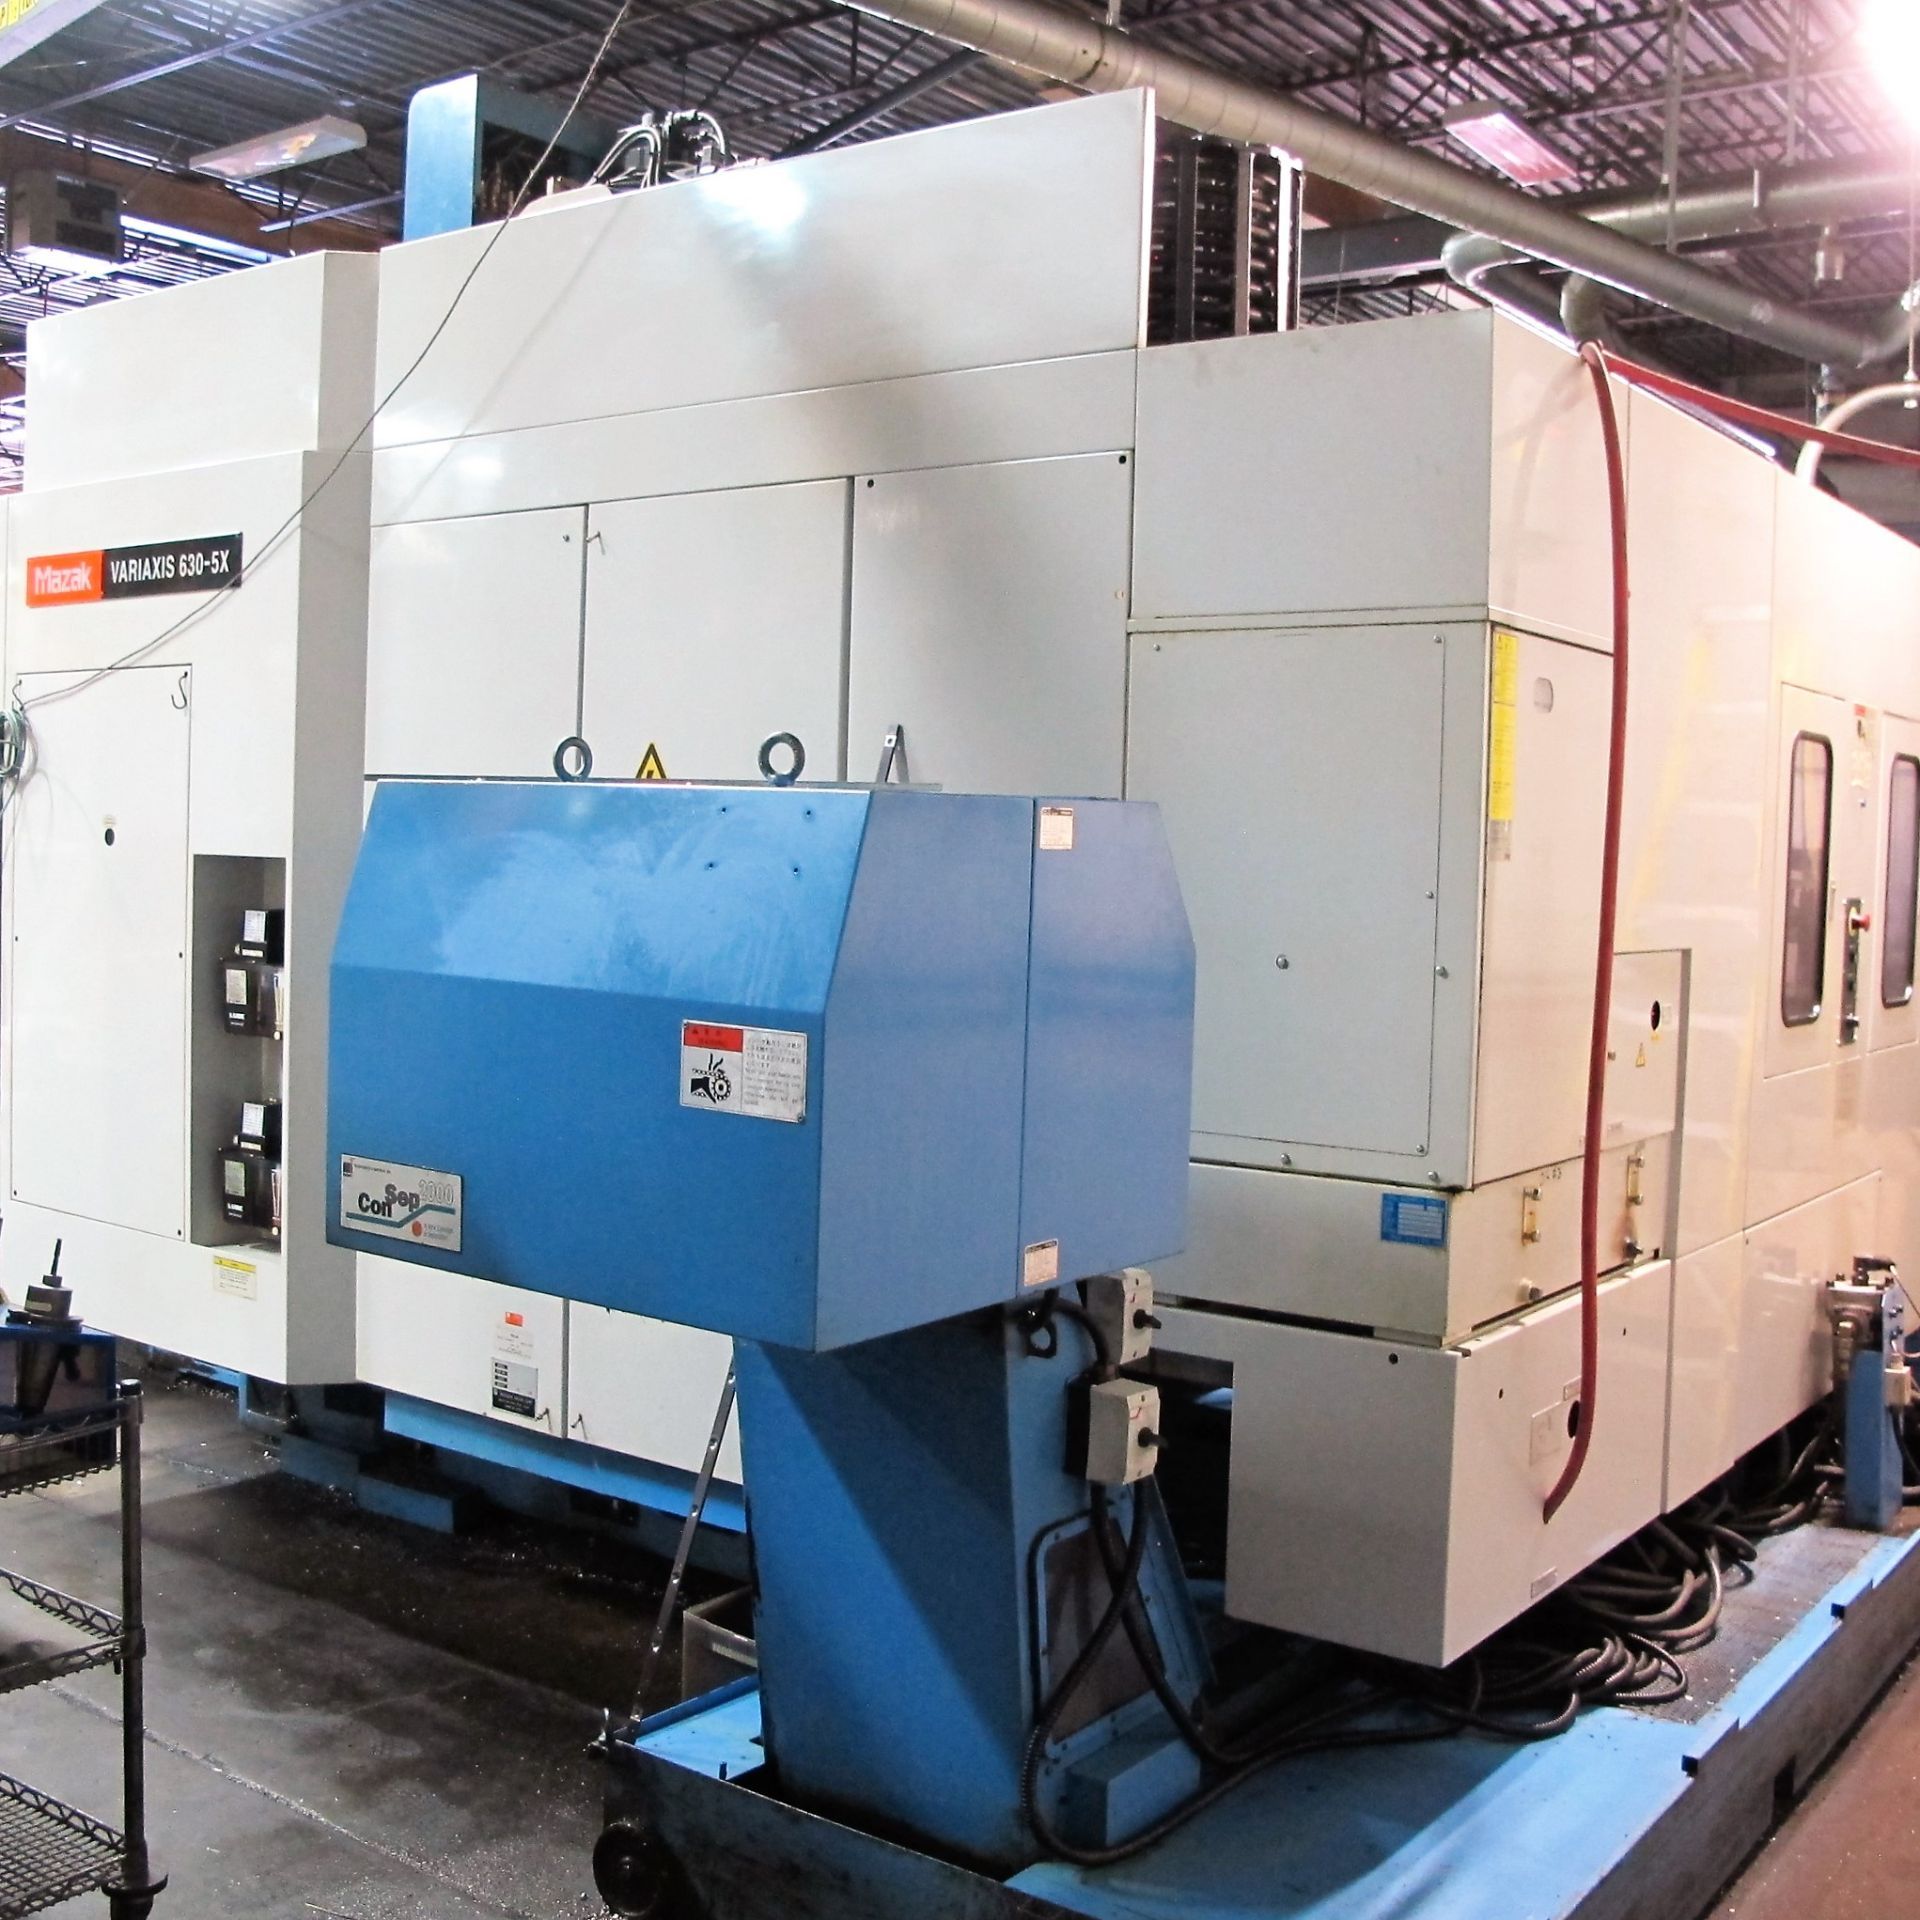 MAZAK VARIAXIS 630 5-AXIS CNC VERTIVAL MACHINING CENTER W/PALLET CHANGER, S/N 160371, NEW 2002 - Image 16 of 19